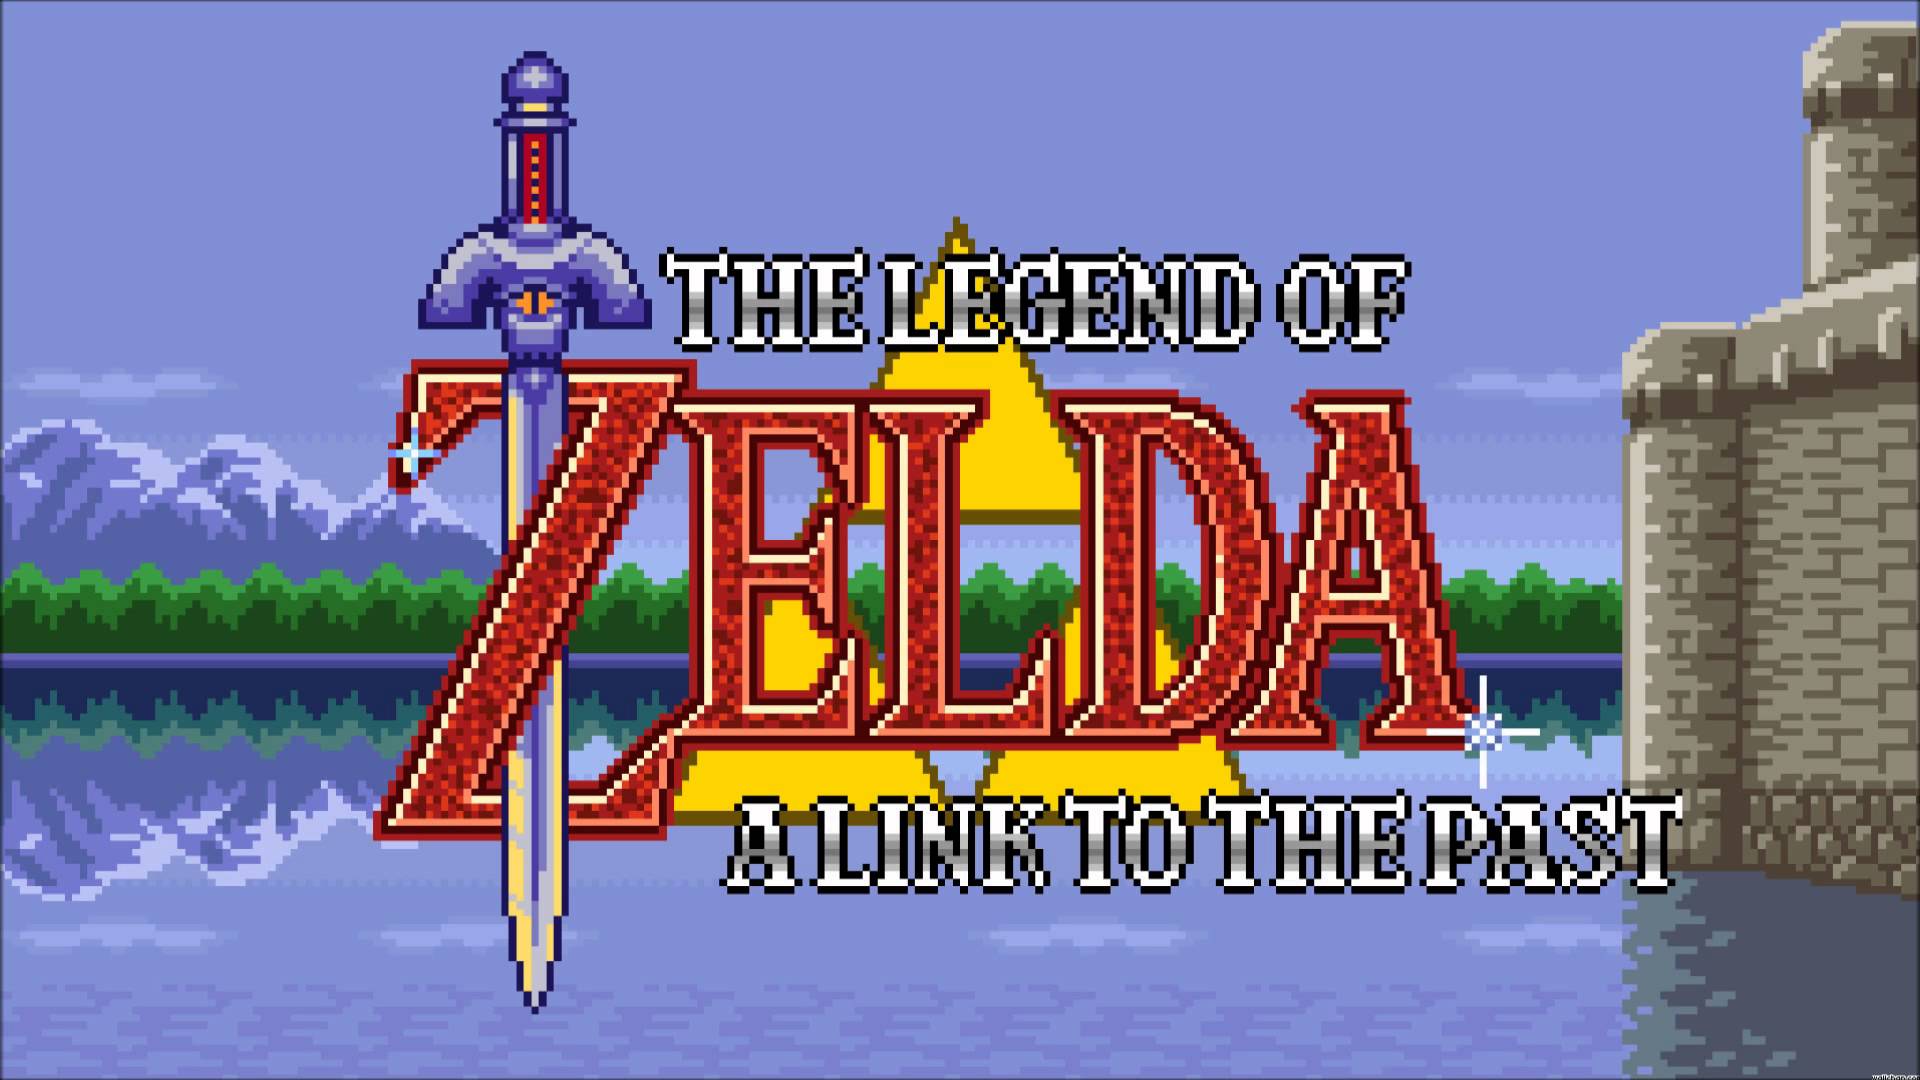 the-legend-of-zelda-a-link-to-the-past-25-aniversaryfrikigamers-com